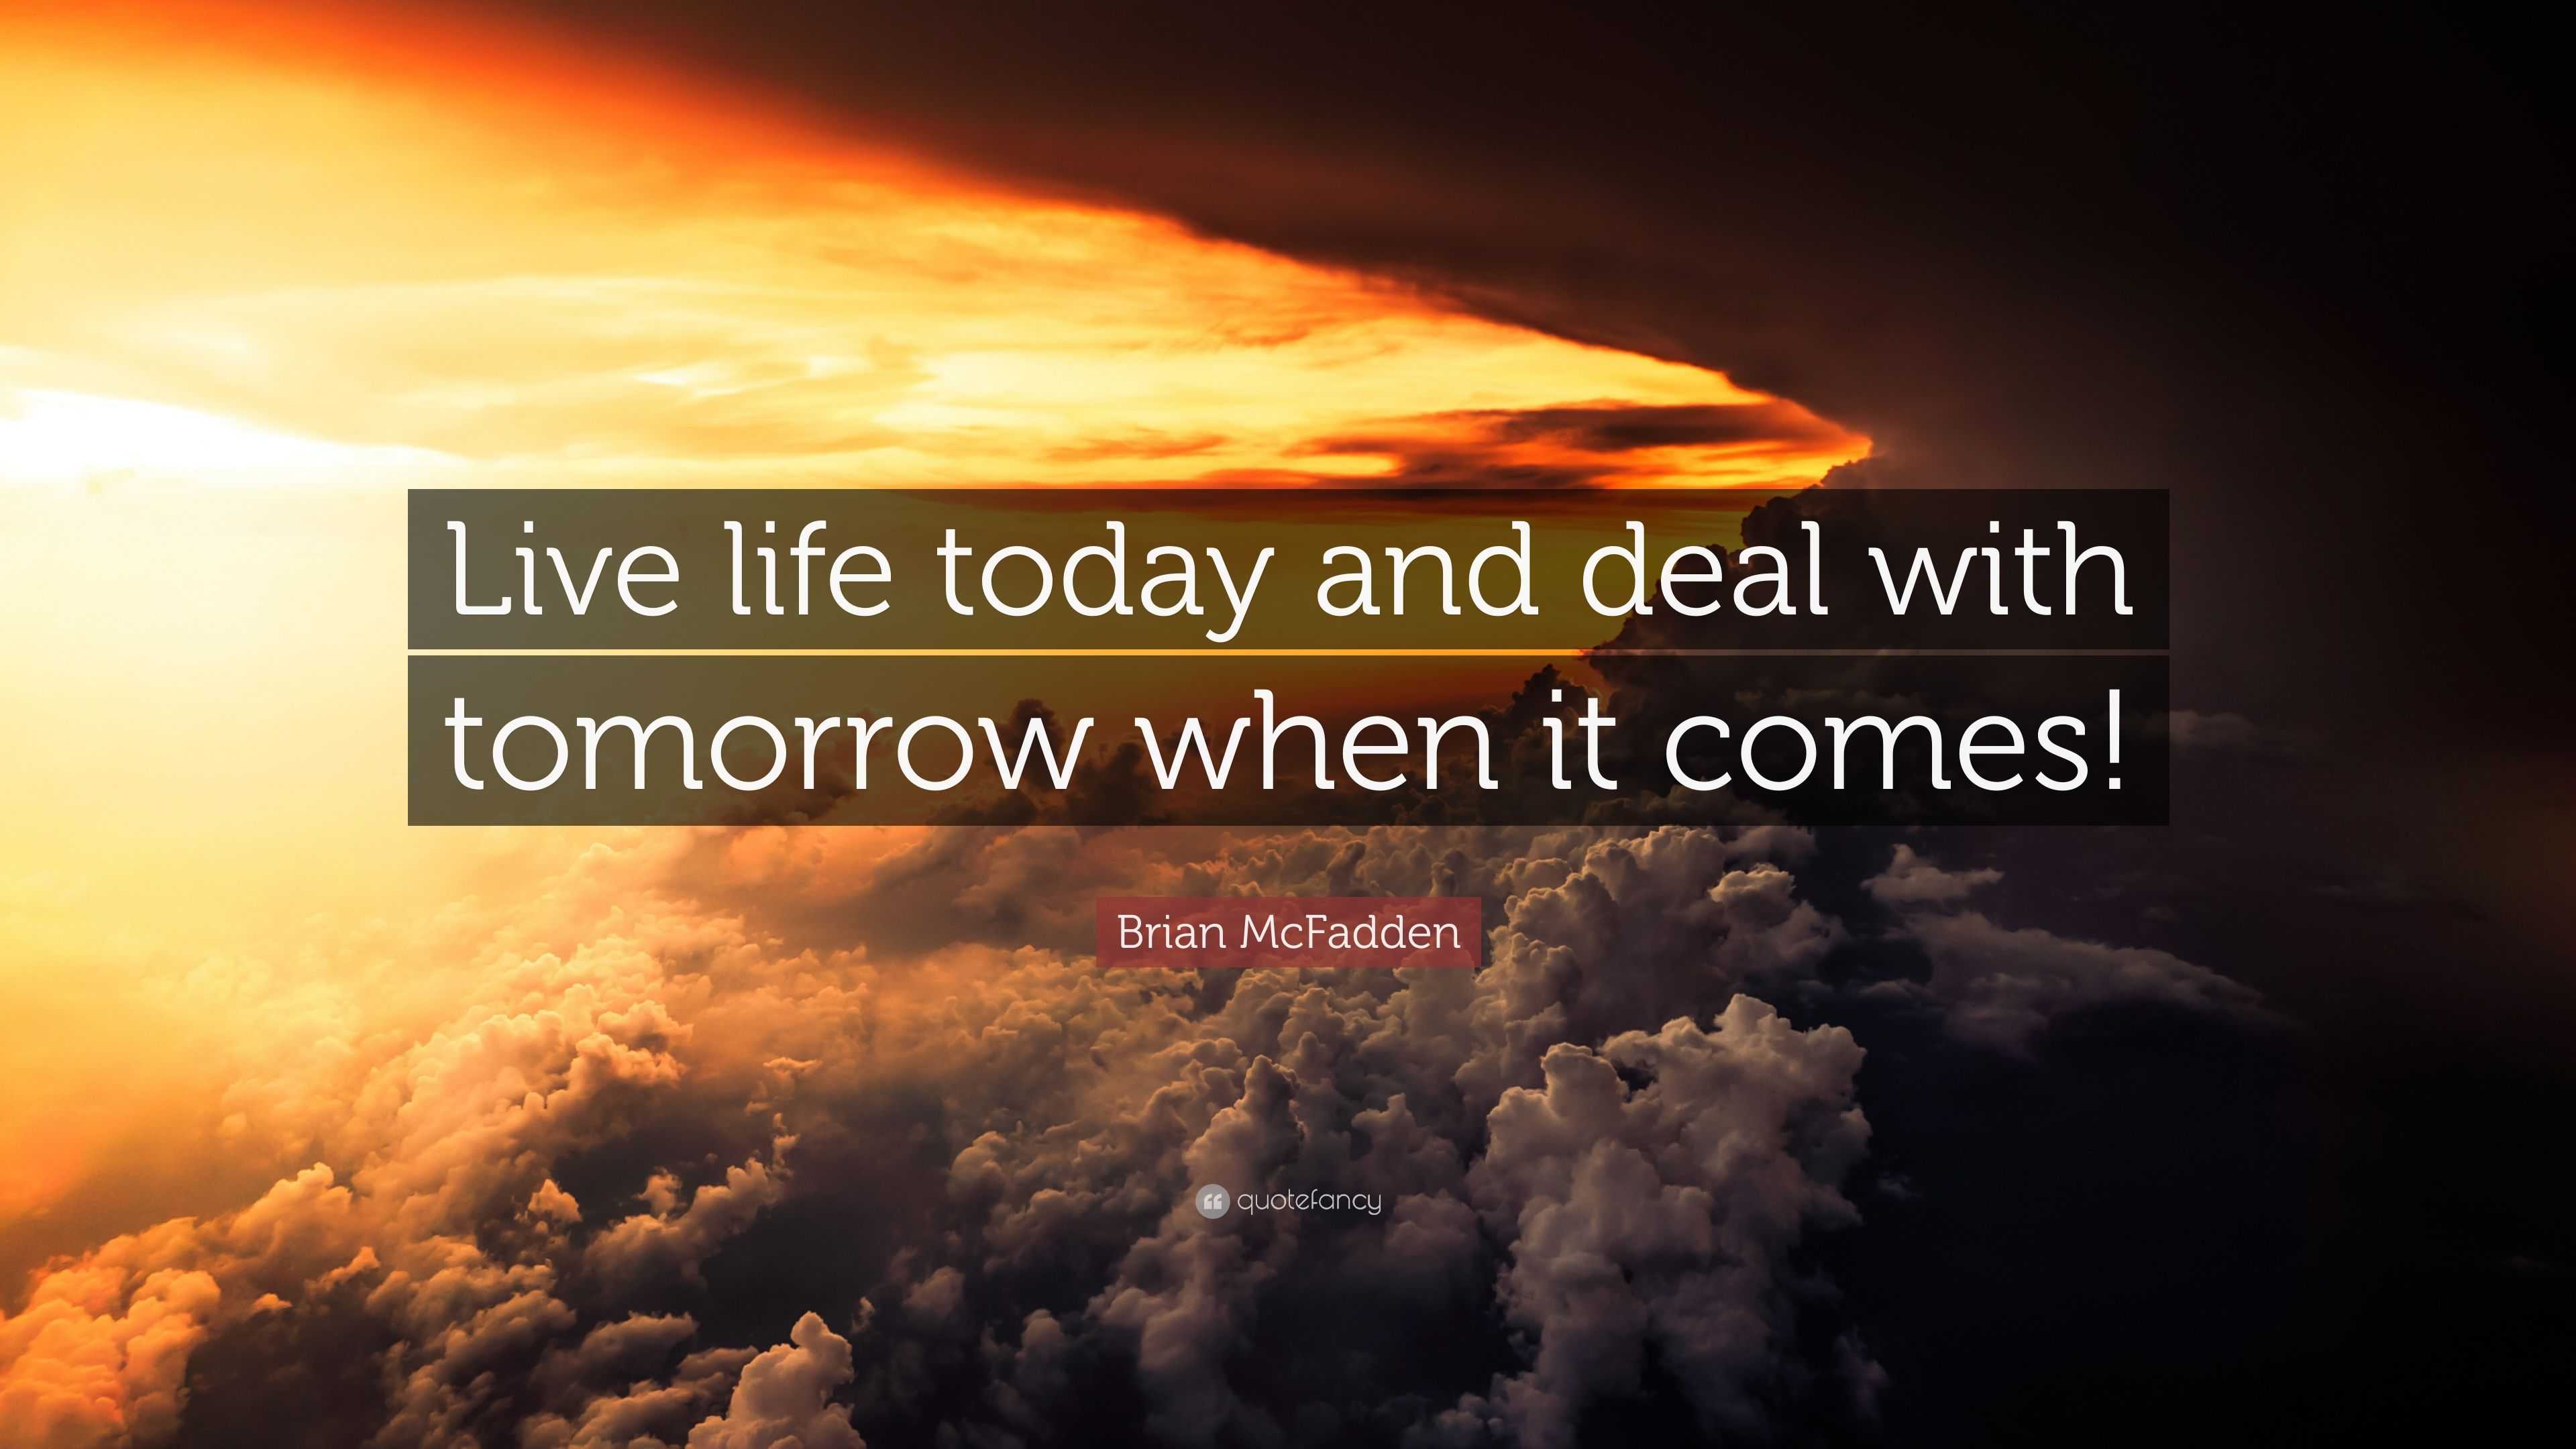 Brian McFadden Quote “Live life today and deal with tomorrow when it es